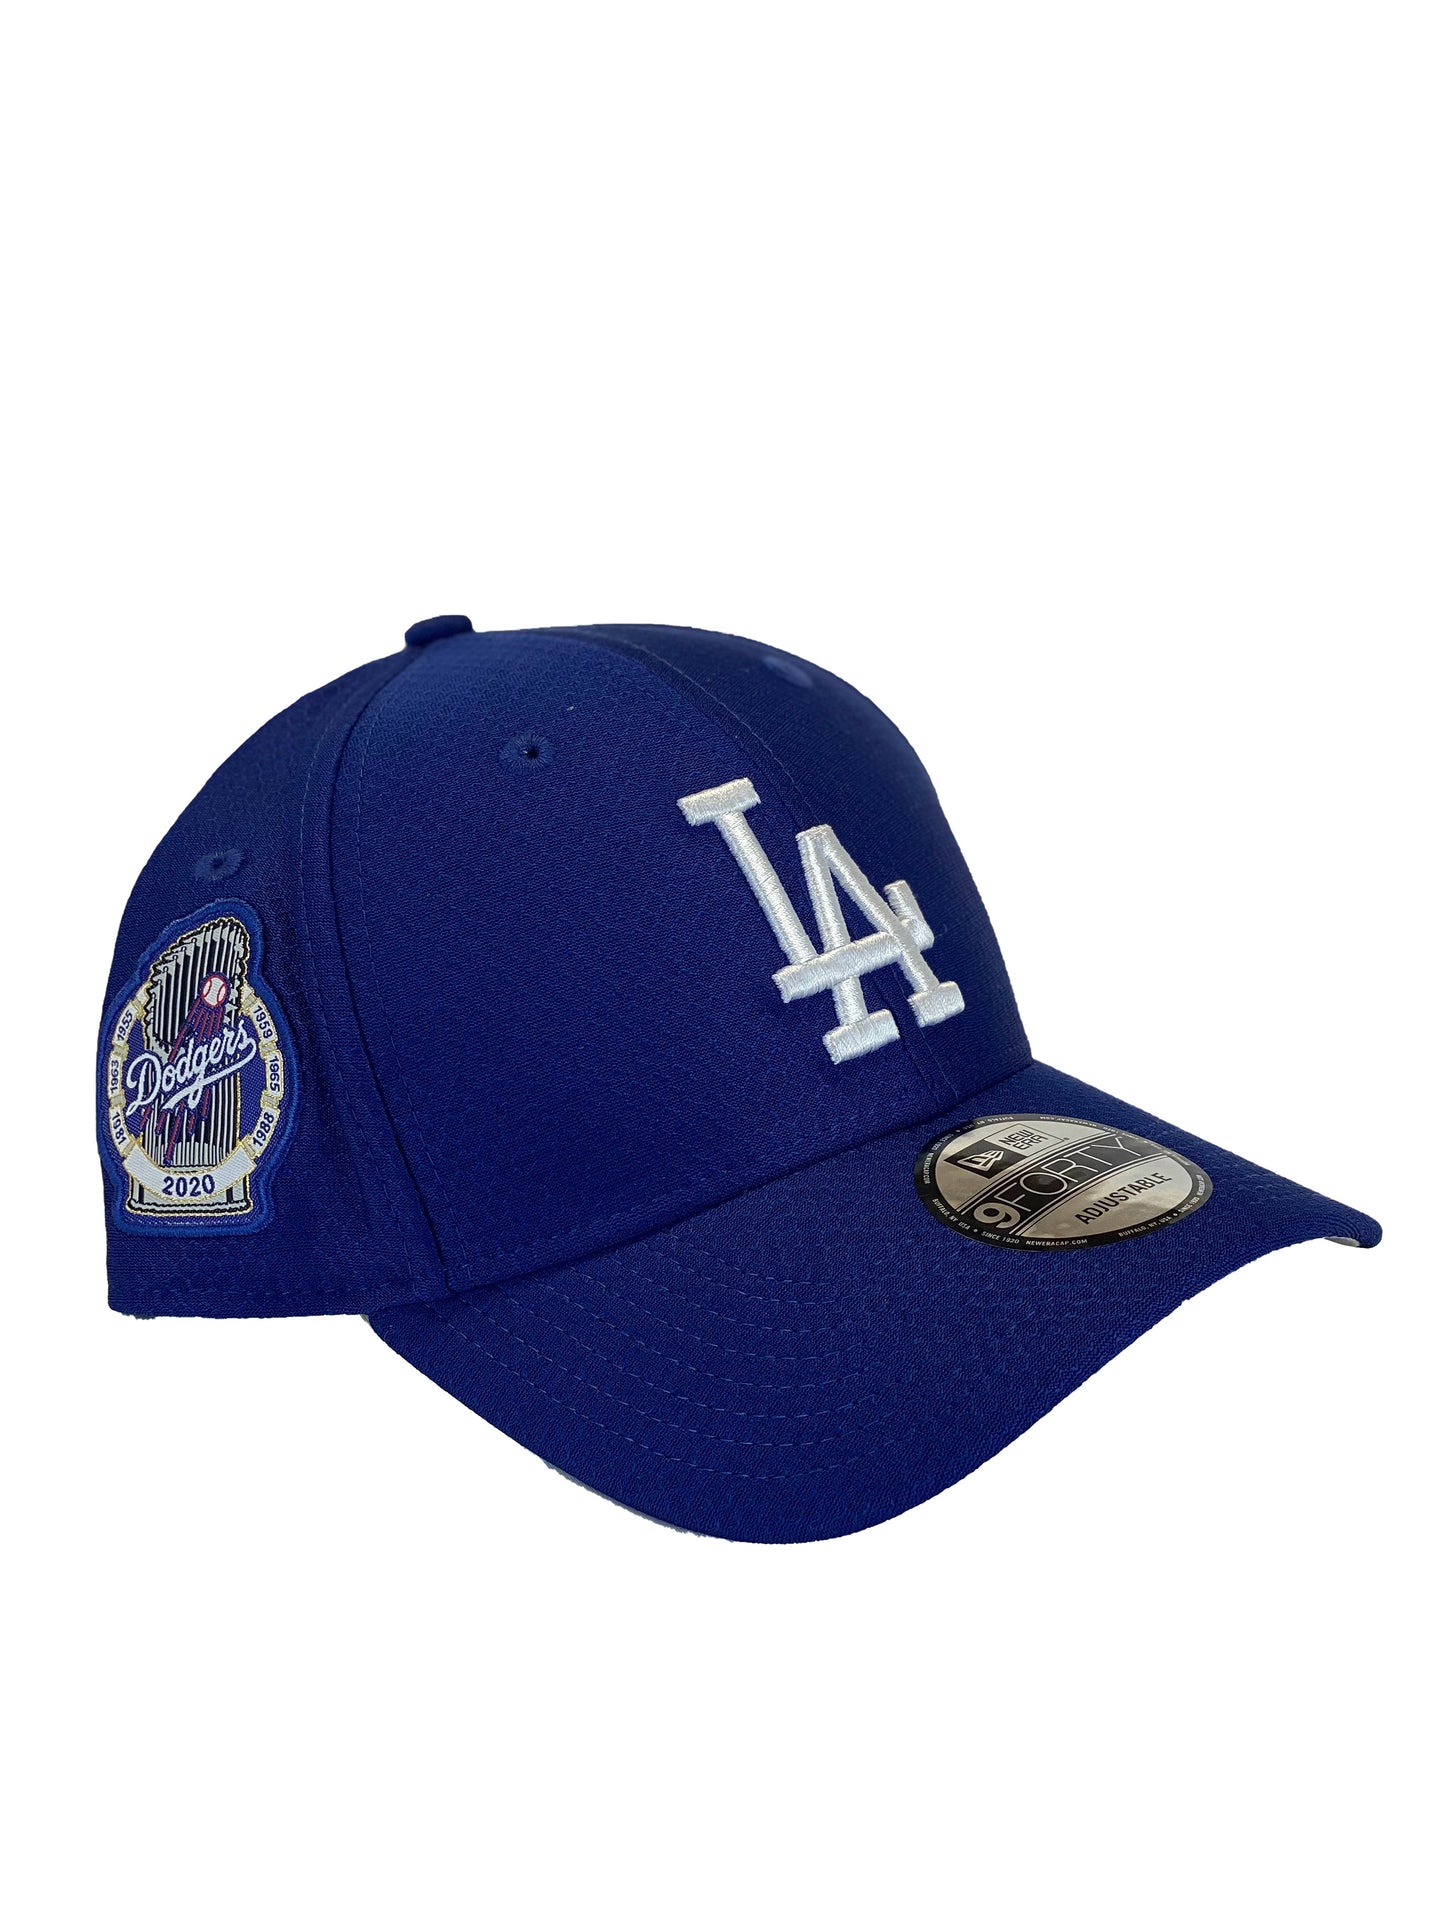 LOS ANGELES DODGERS GLORY 9FORTY AJUSTABLE